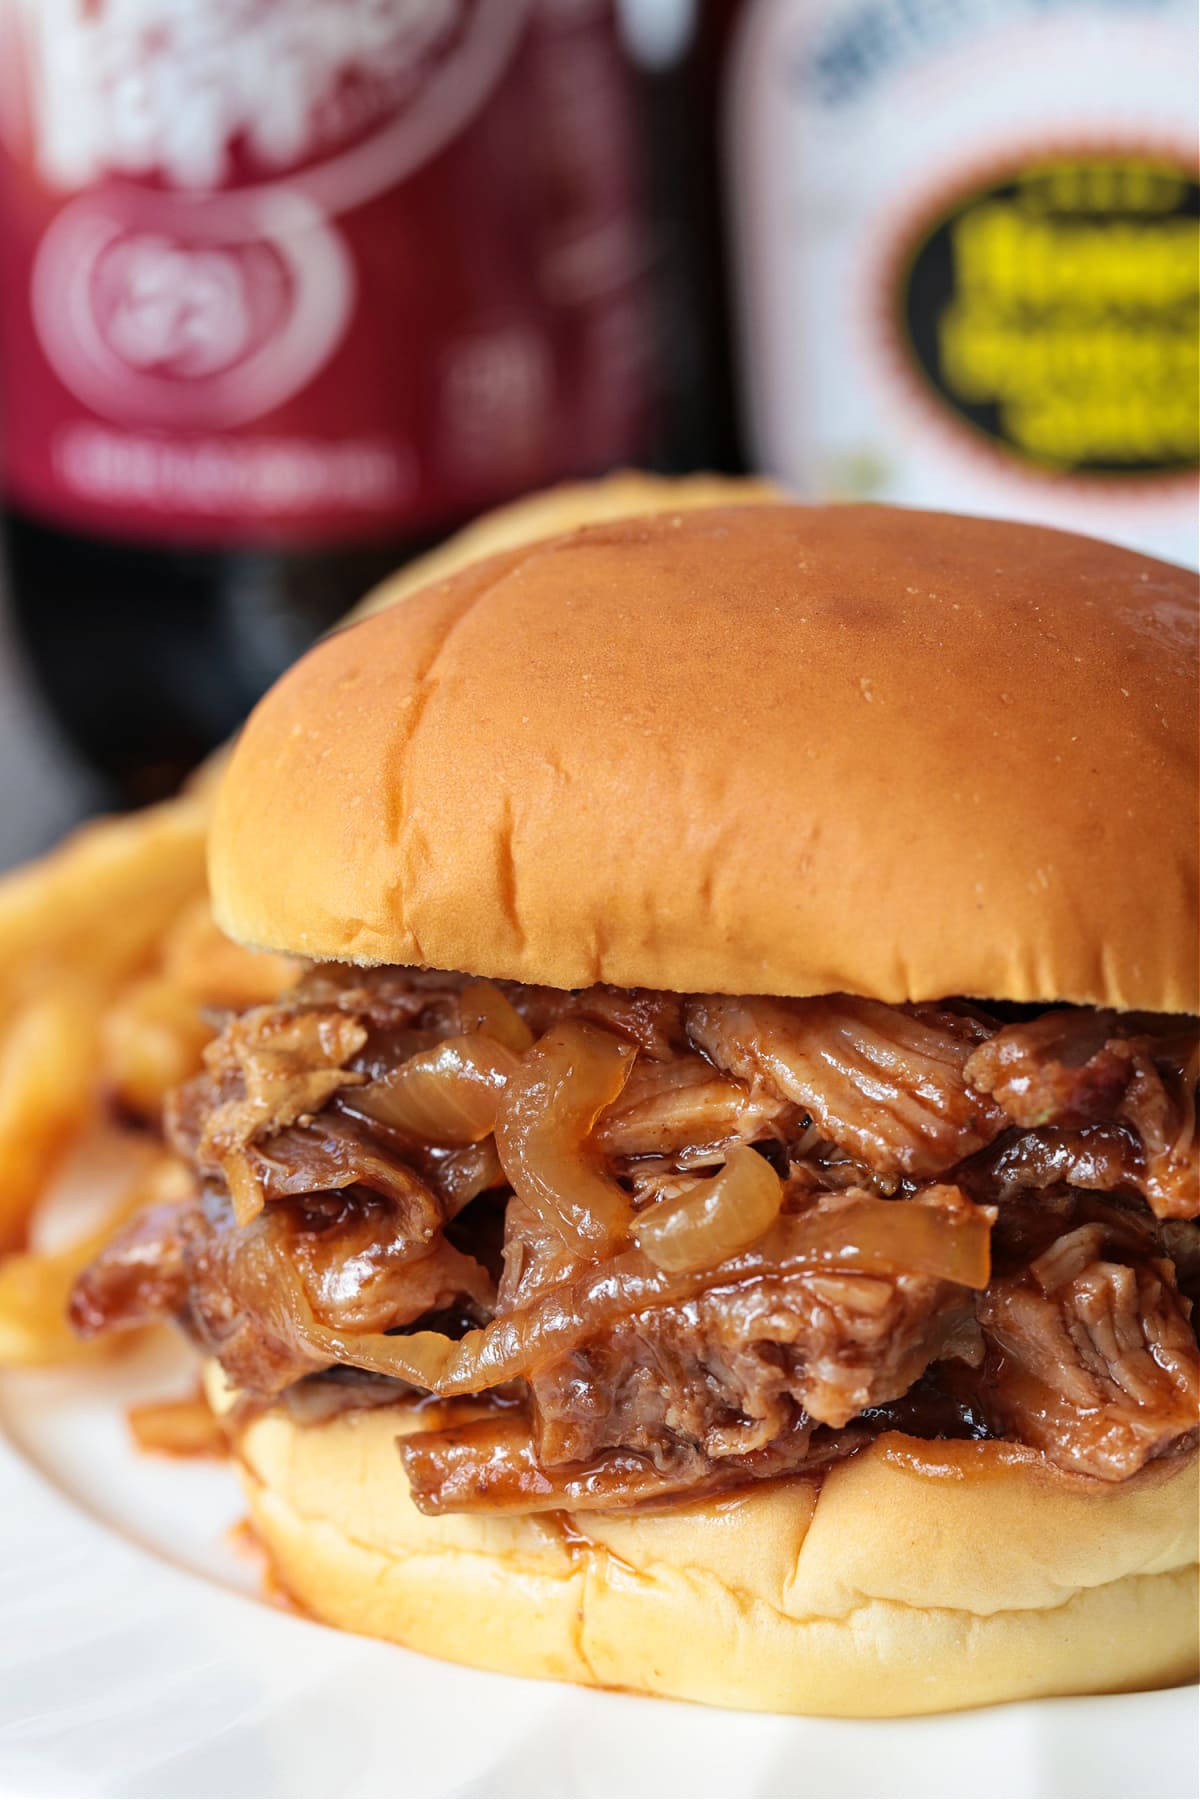 dr. pepper pulled pork sandwich on plate with soda in background